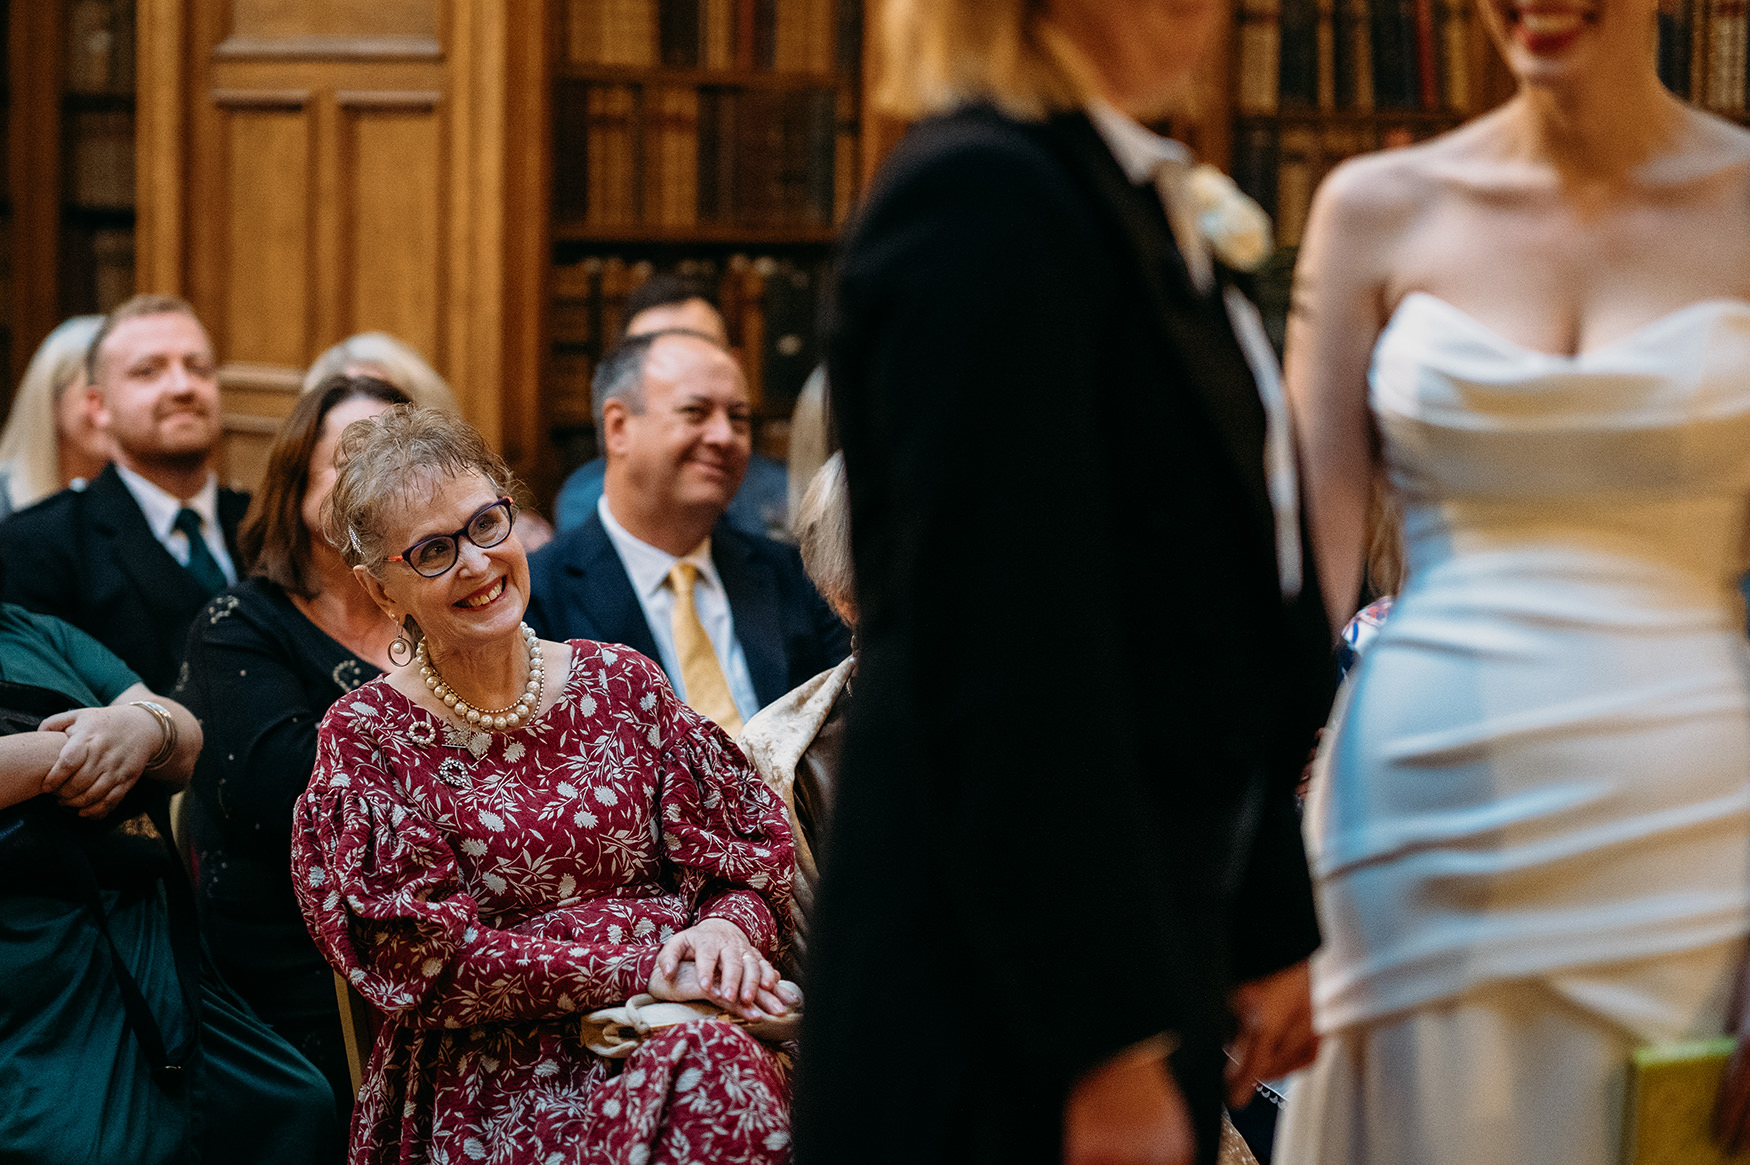 mother of bride looks at daughter with pride during her Royal College of Physicians Wedding ceremony